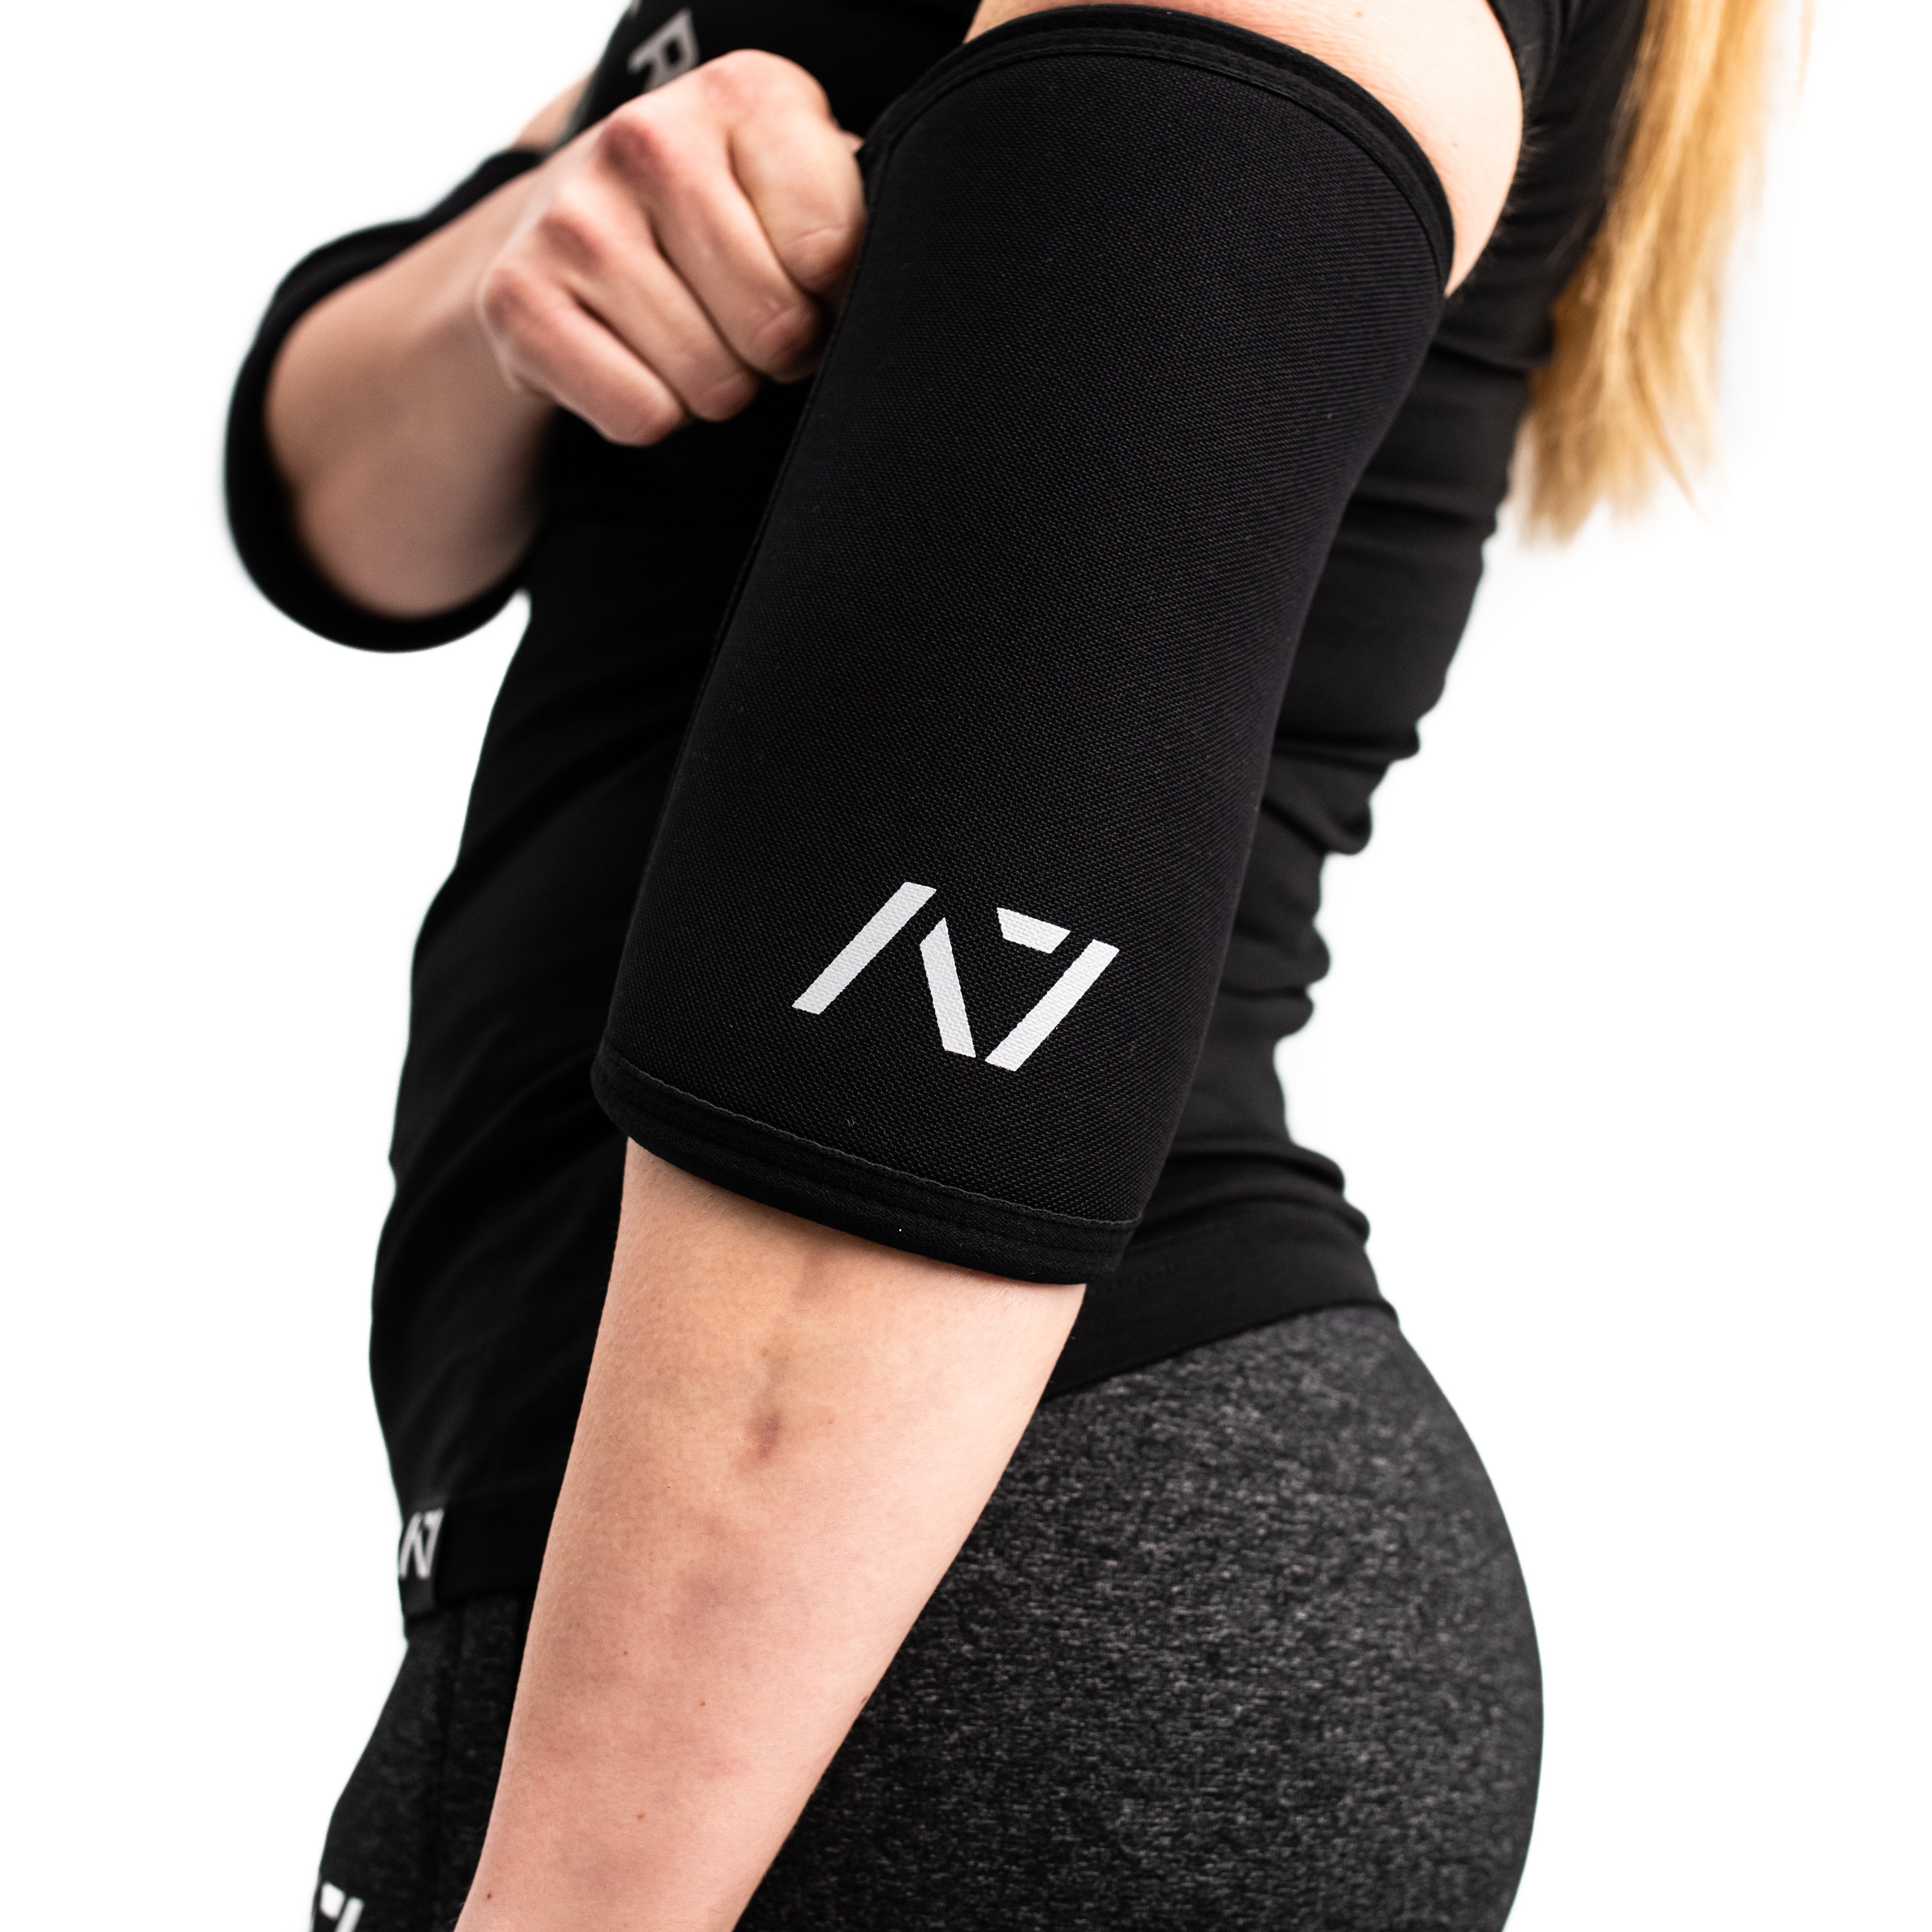 A7 7mm Elbow Sleeves | A7 Europe Shipping to EU – A7 EUROPE